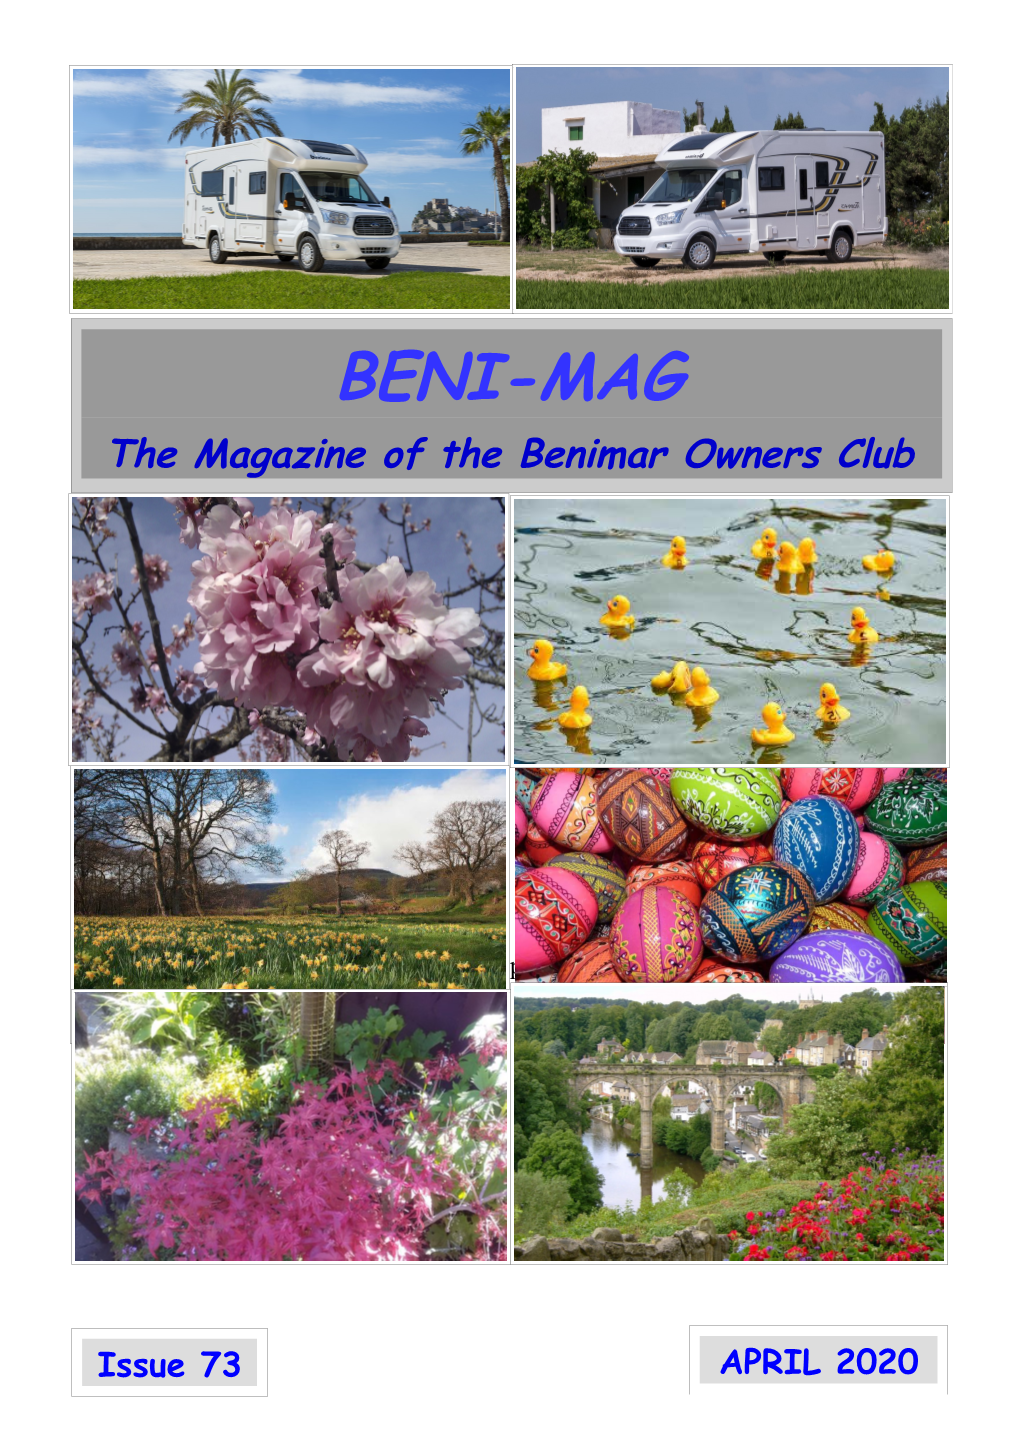 BENI-MAG the Magazine of the Benimar Owners Club